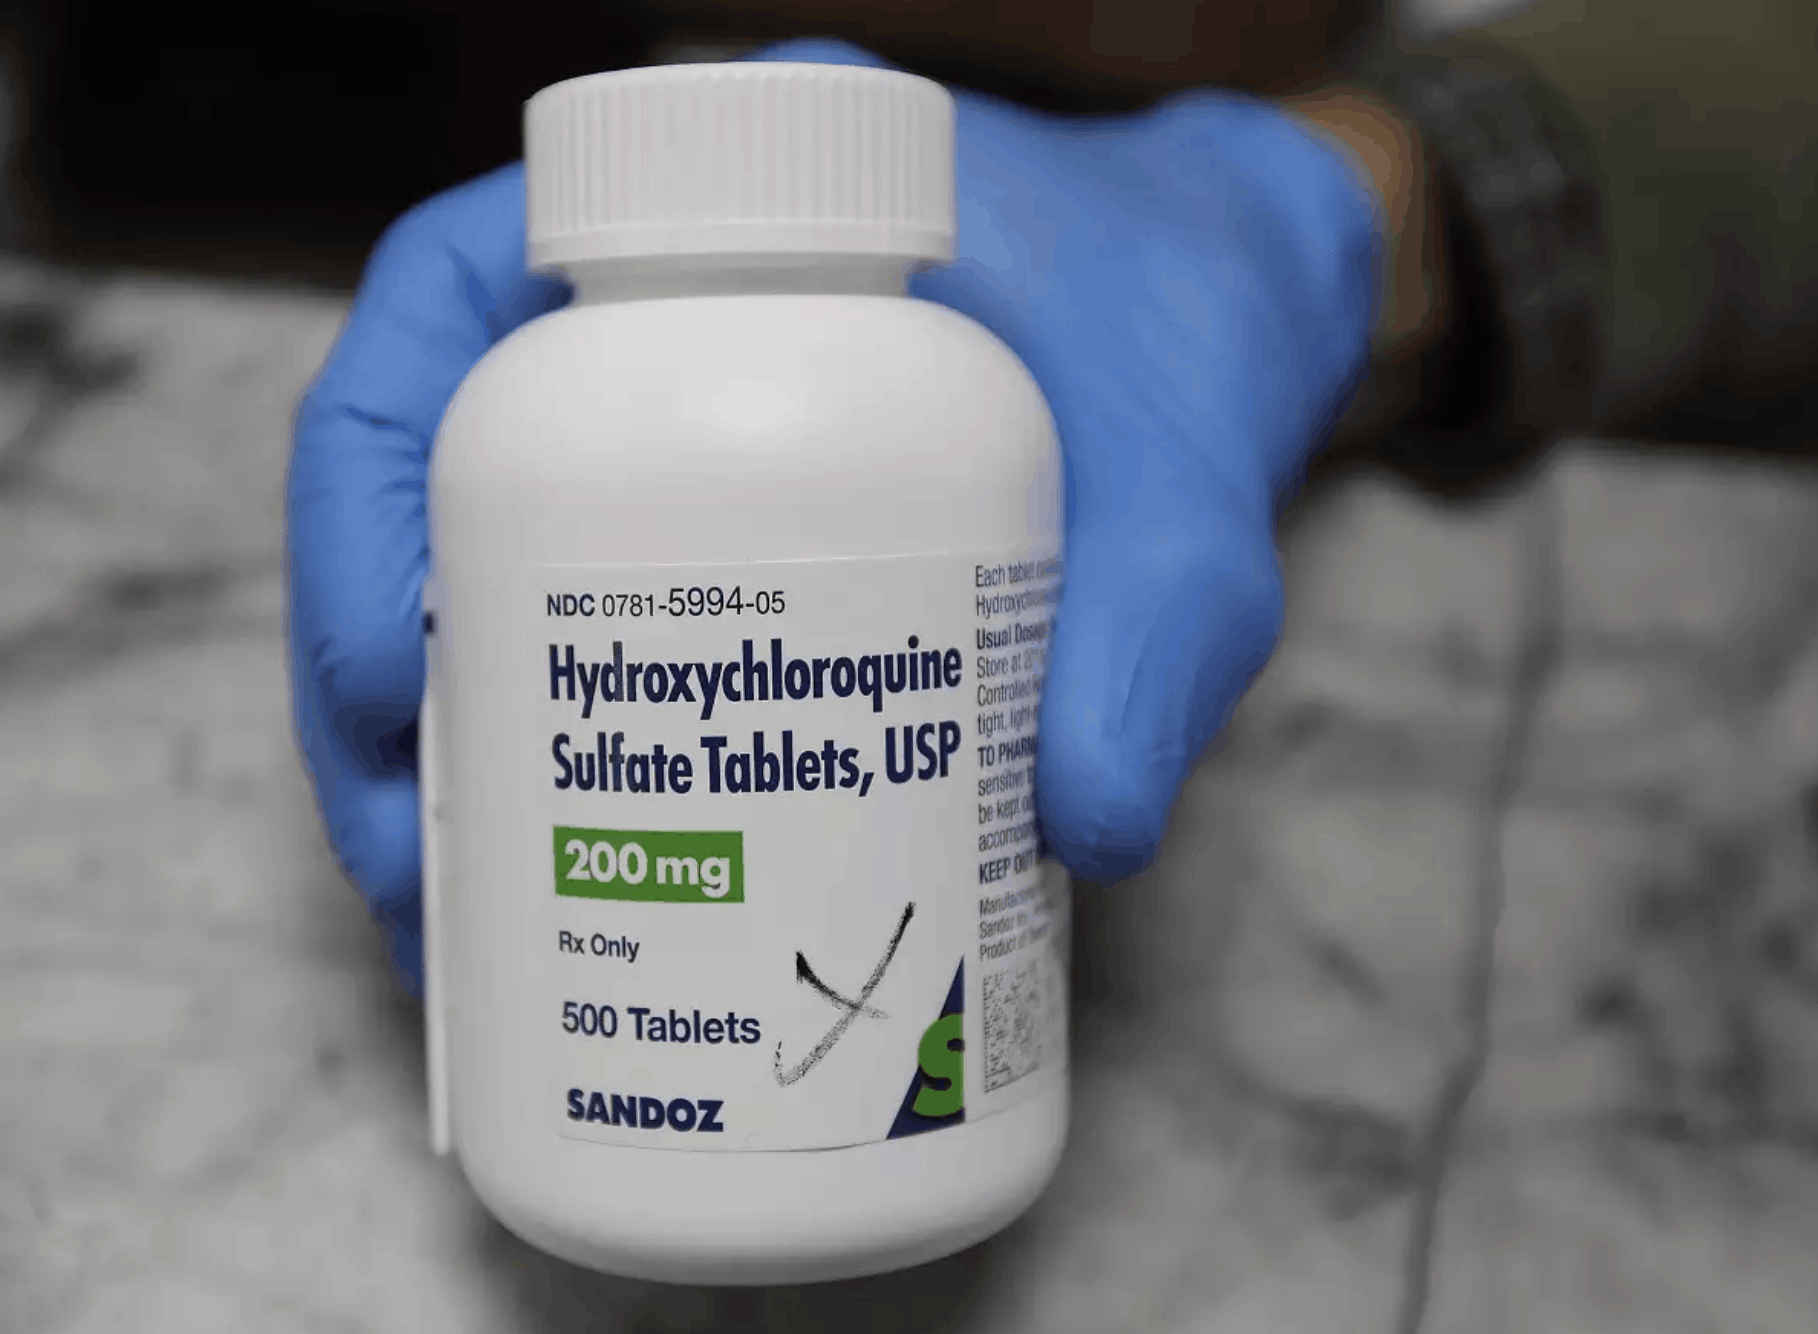 Hydroxynchloroquine Sulfate Tablet